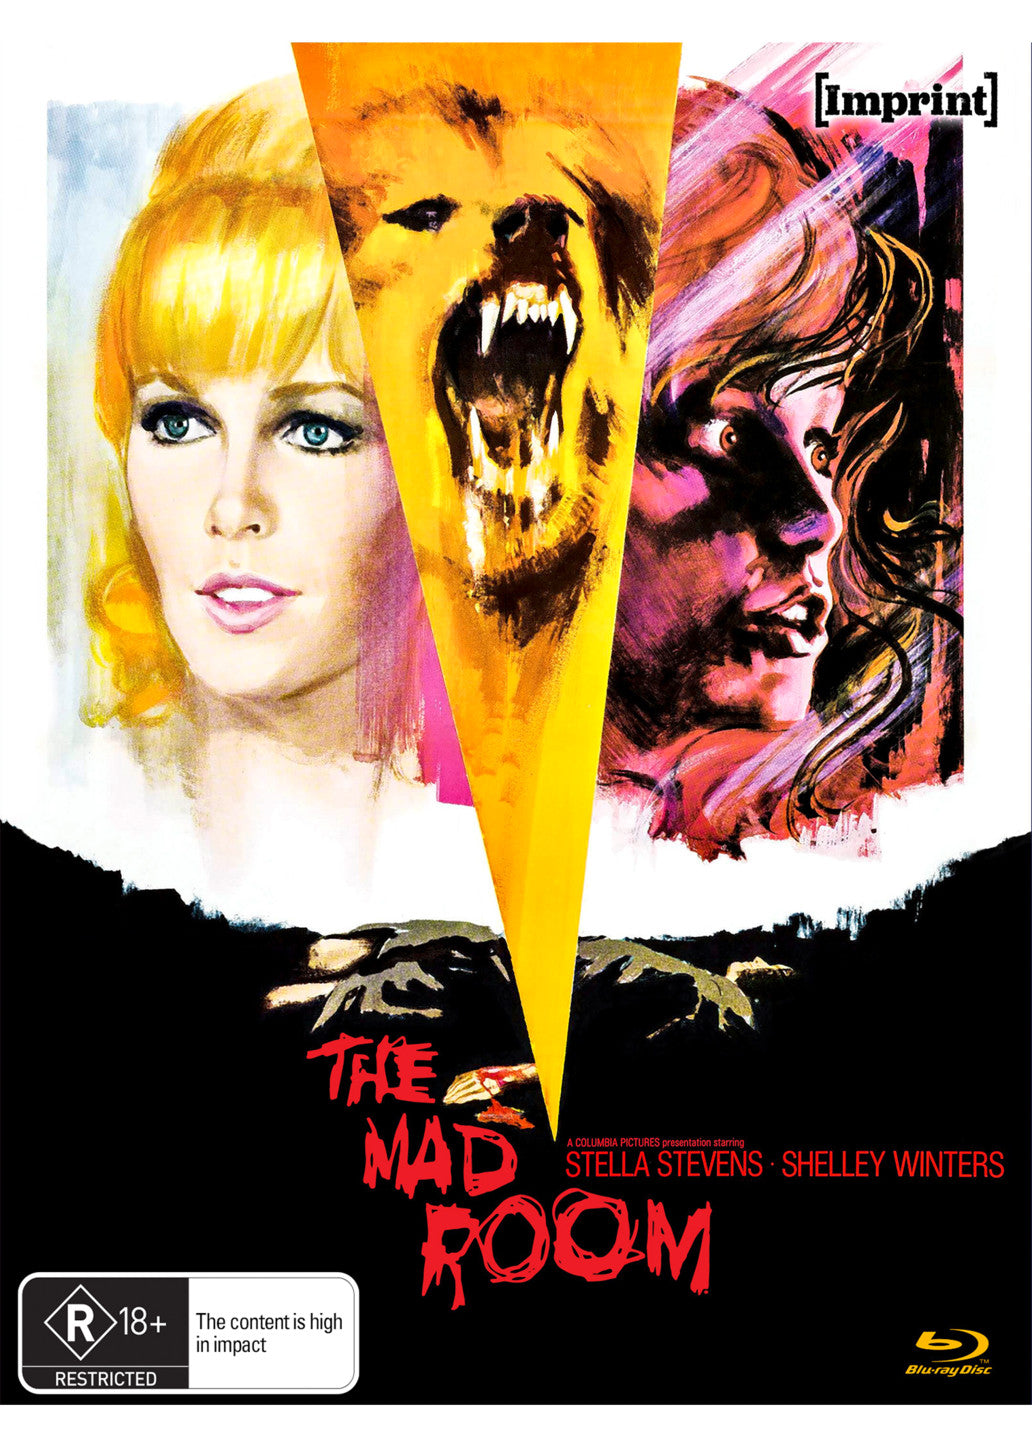 THE MAD ROOM (IMPRINT COLLECTION #260)